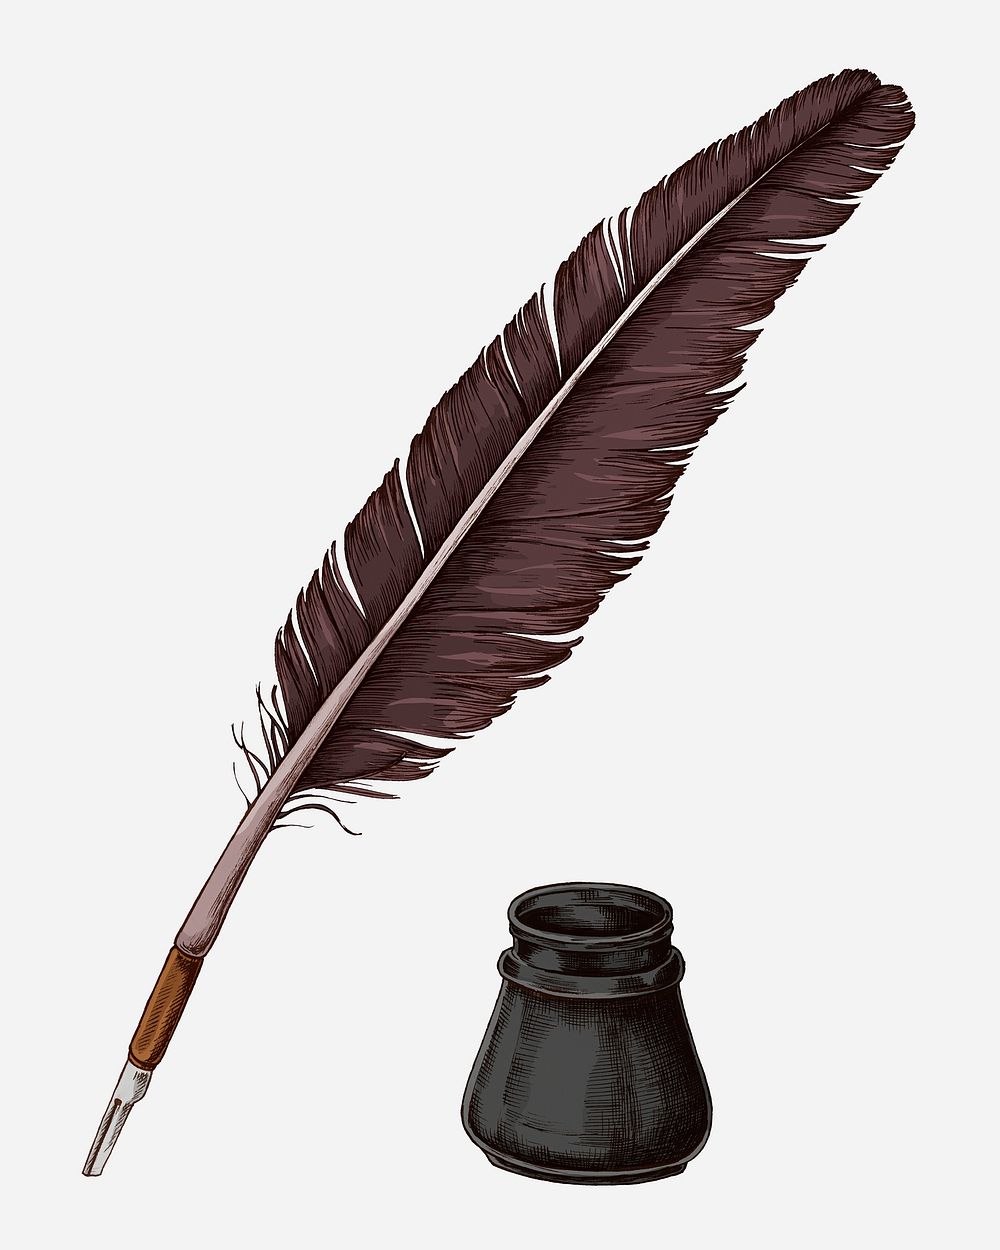 Hand drawn quill pen with an inkwell illustration